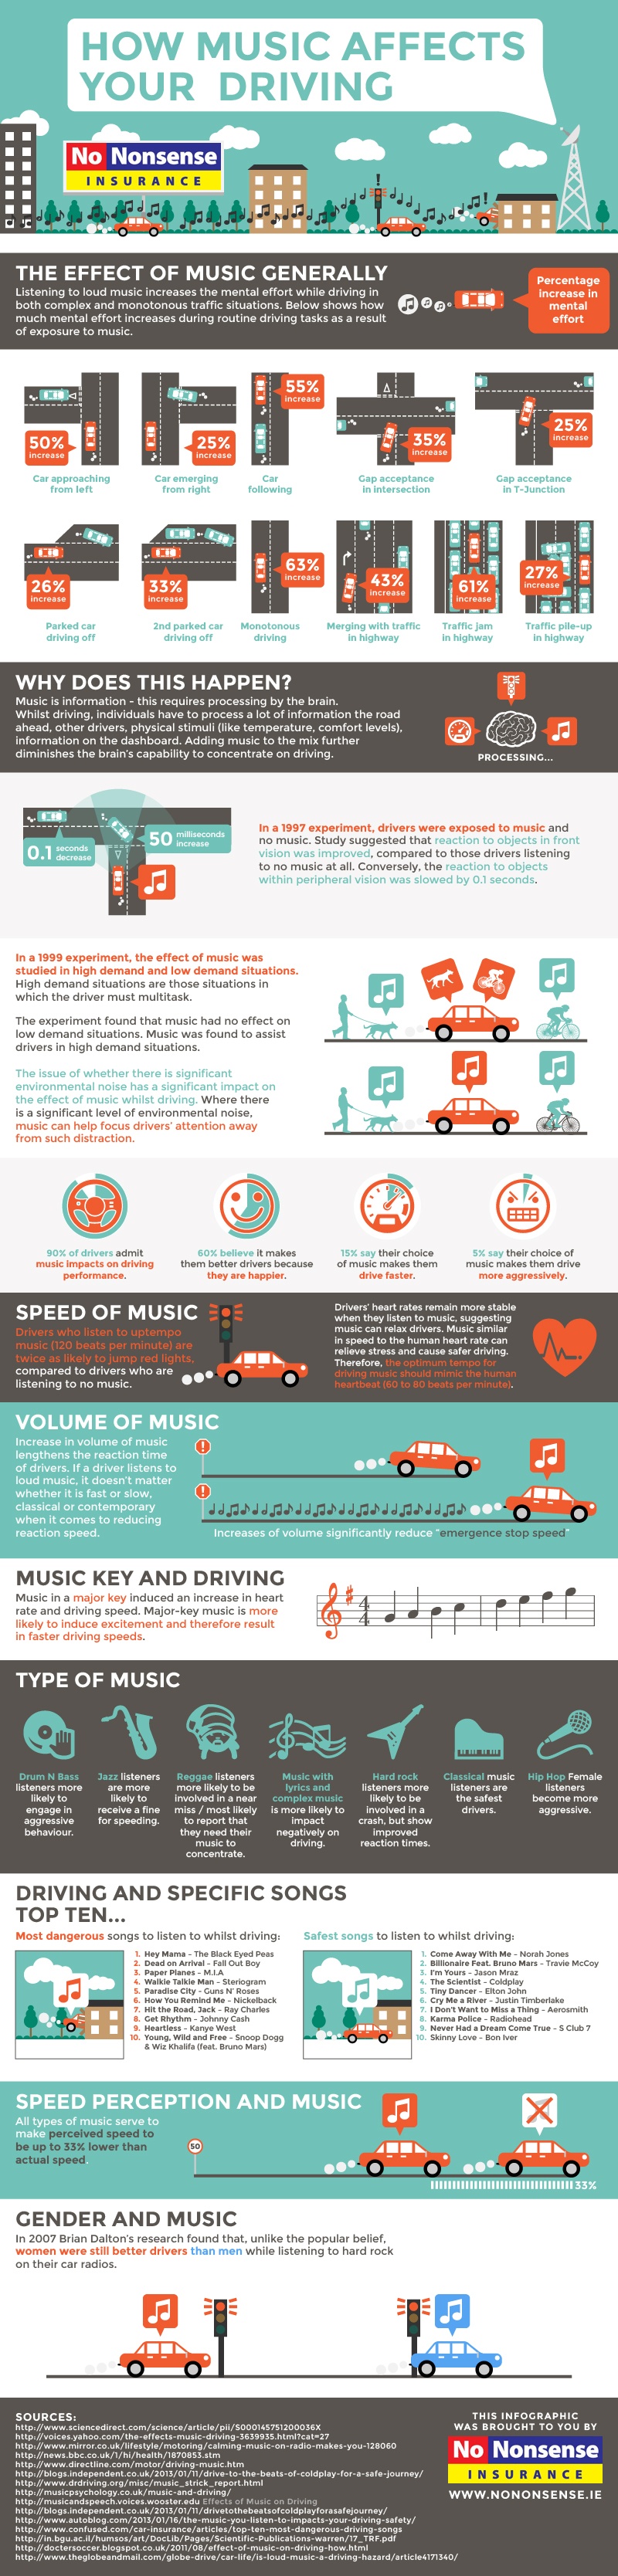 music-affects-driving-infographic.jpg